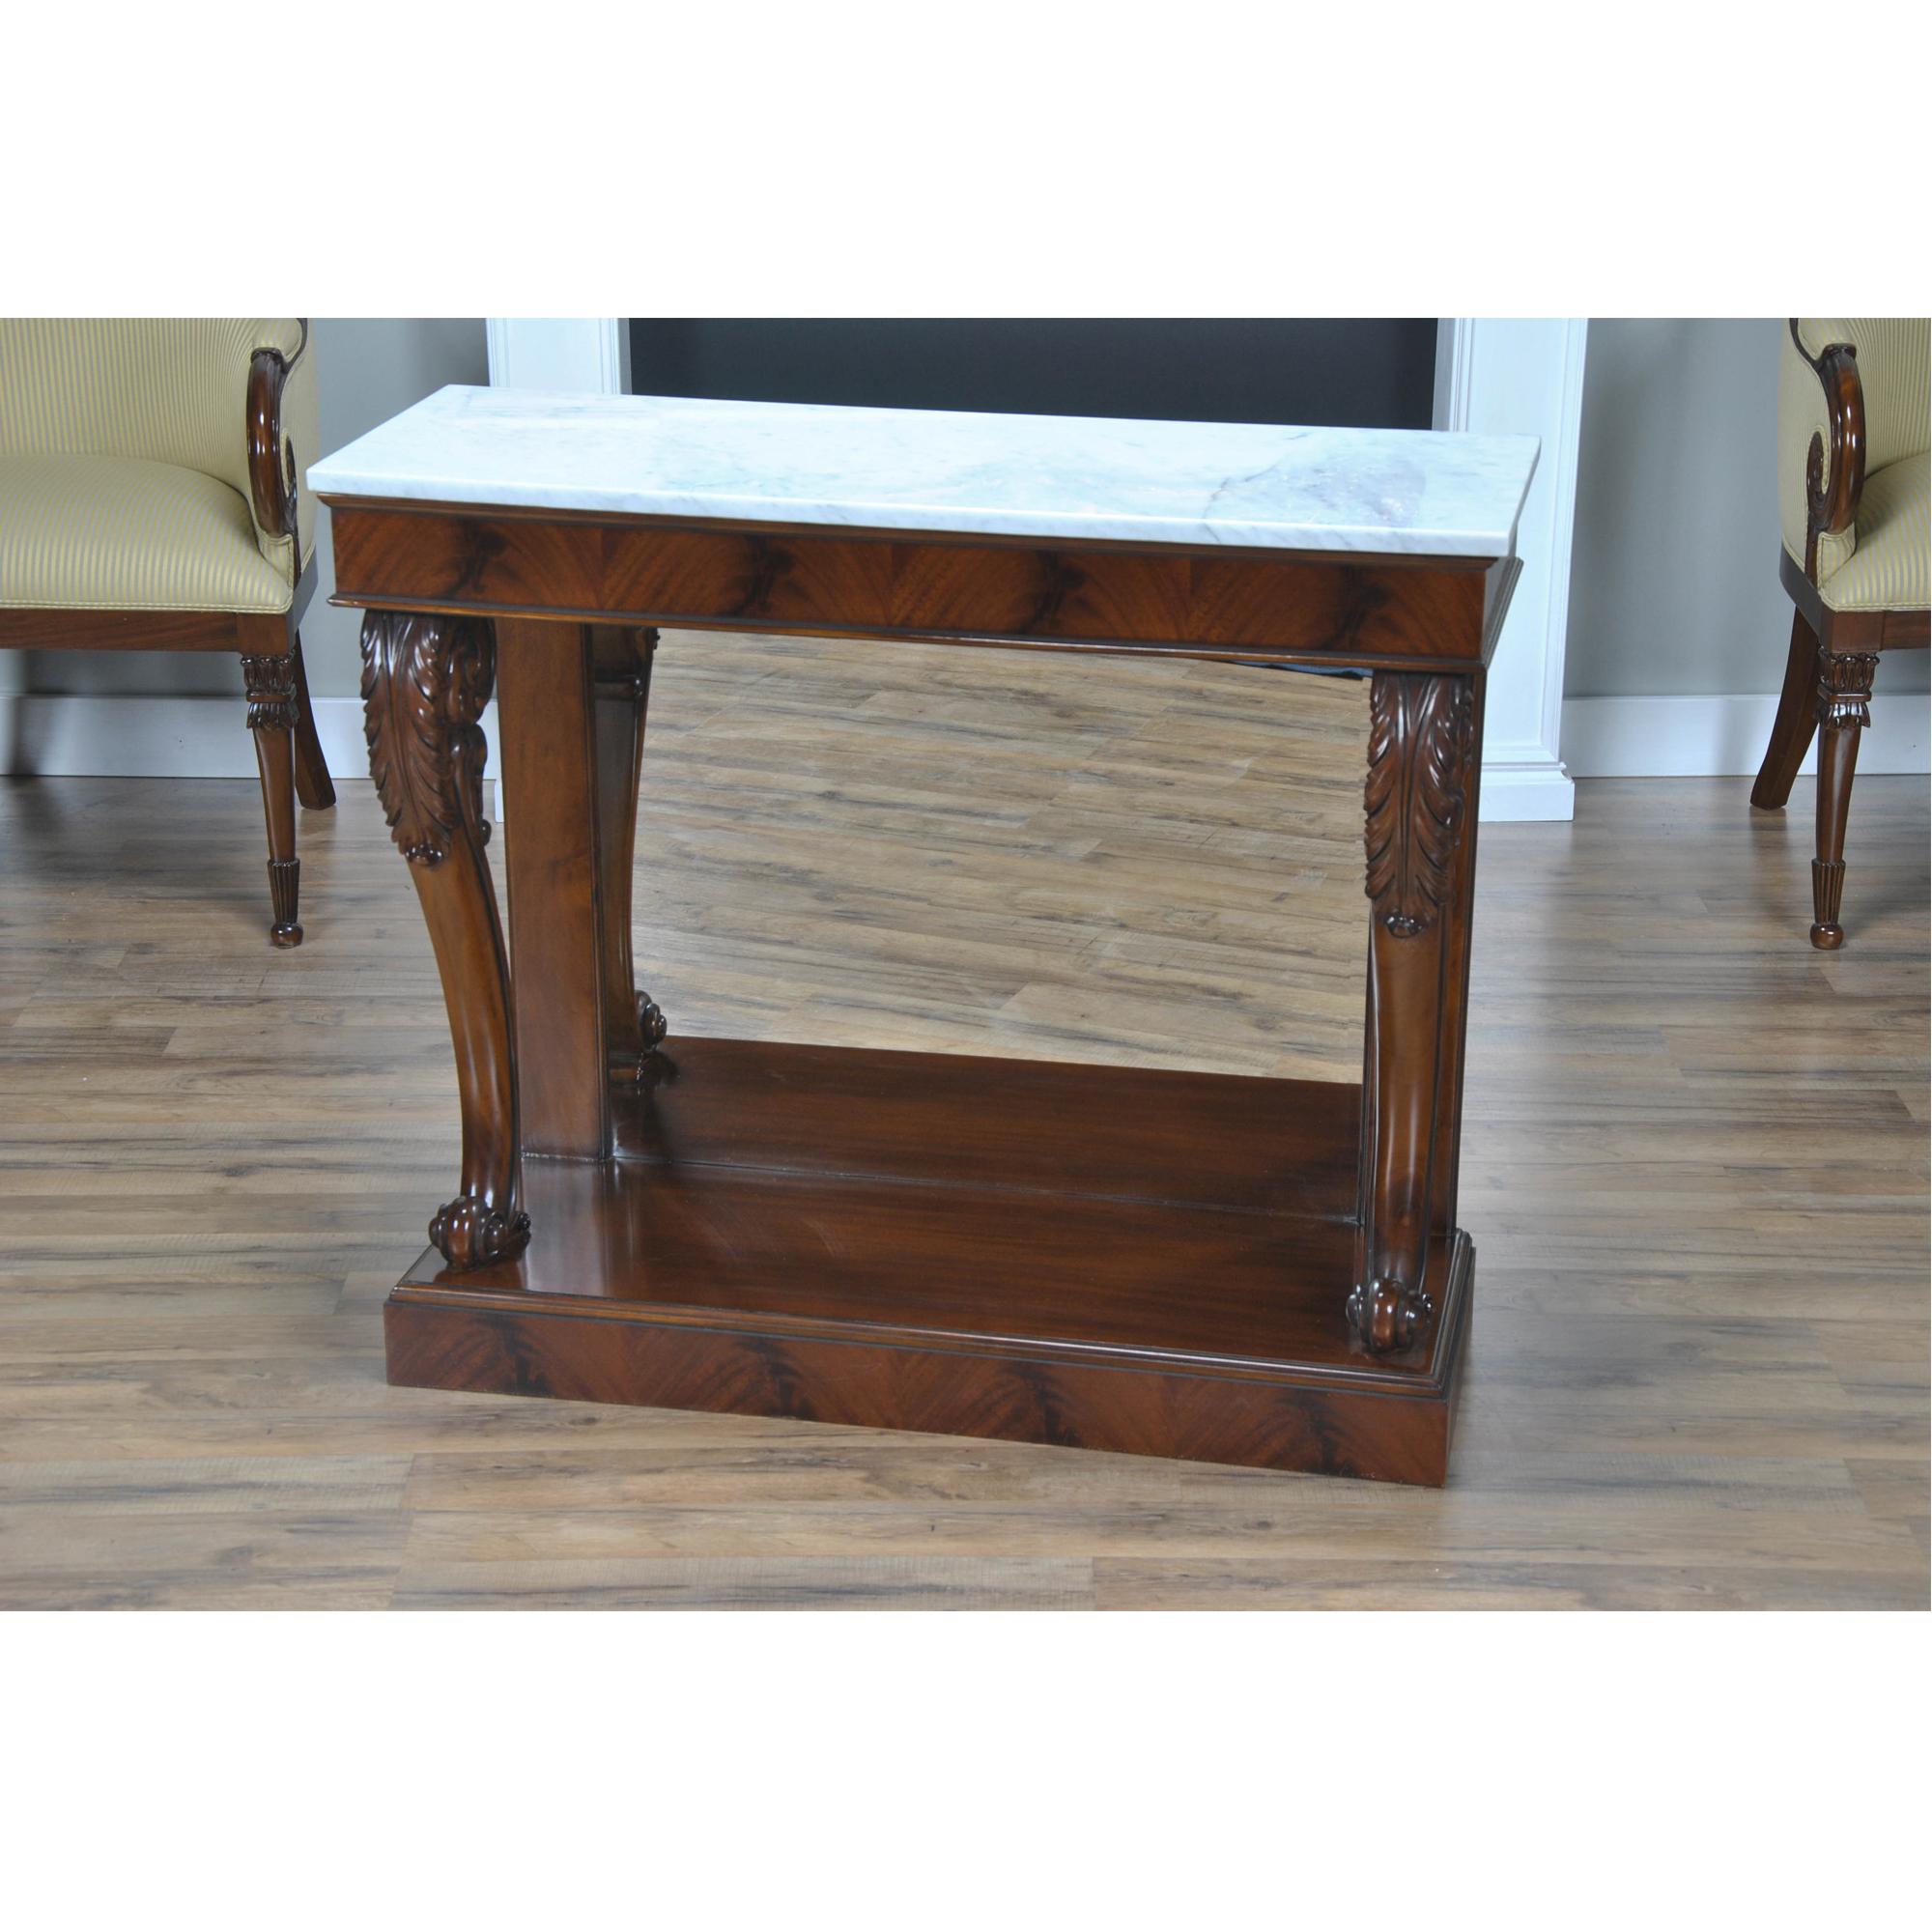 A great accent piece this Mahogany Marble Top Console which was originally designed for use in a front entry way but our clients tell us they find uses for it in almost every room of their homes. The detachable marble top rests on a beautiful frieze